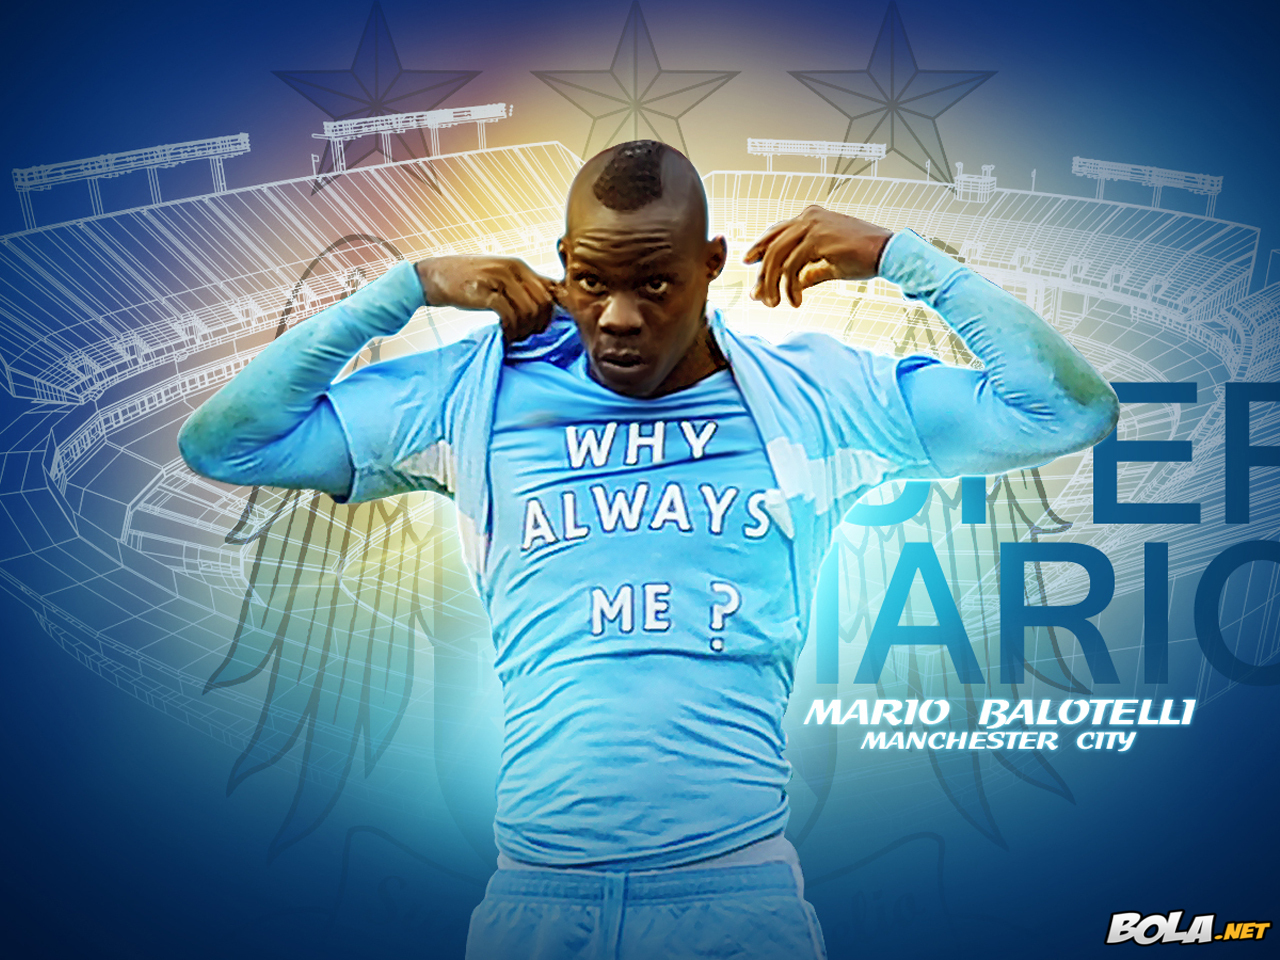 Mario Balotelli The good, the bad and the funny